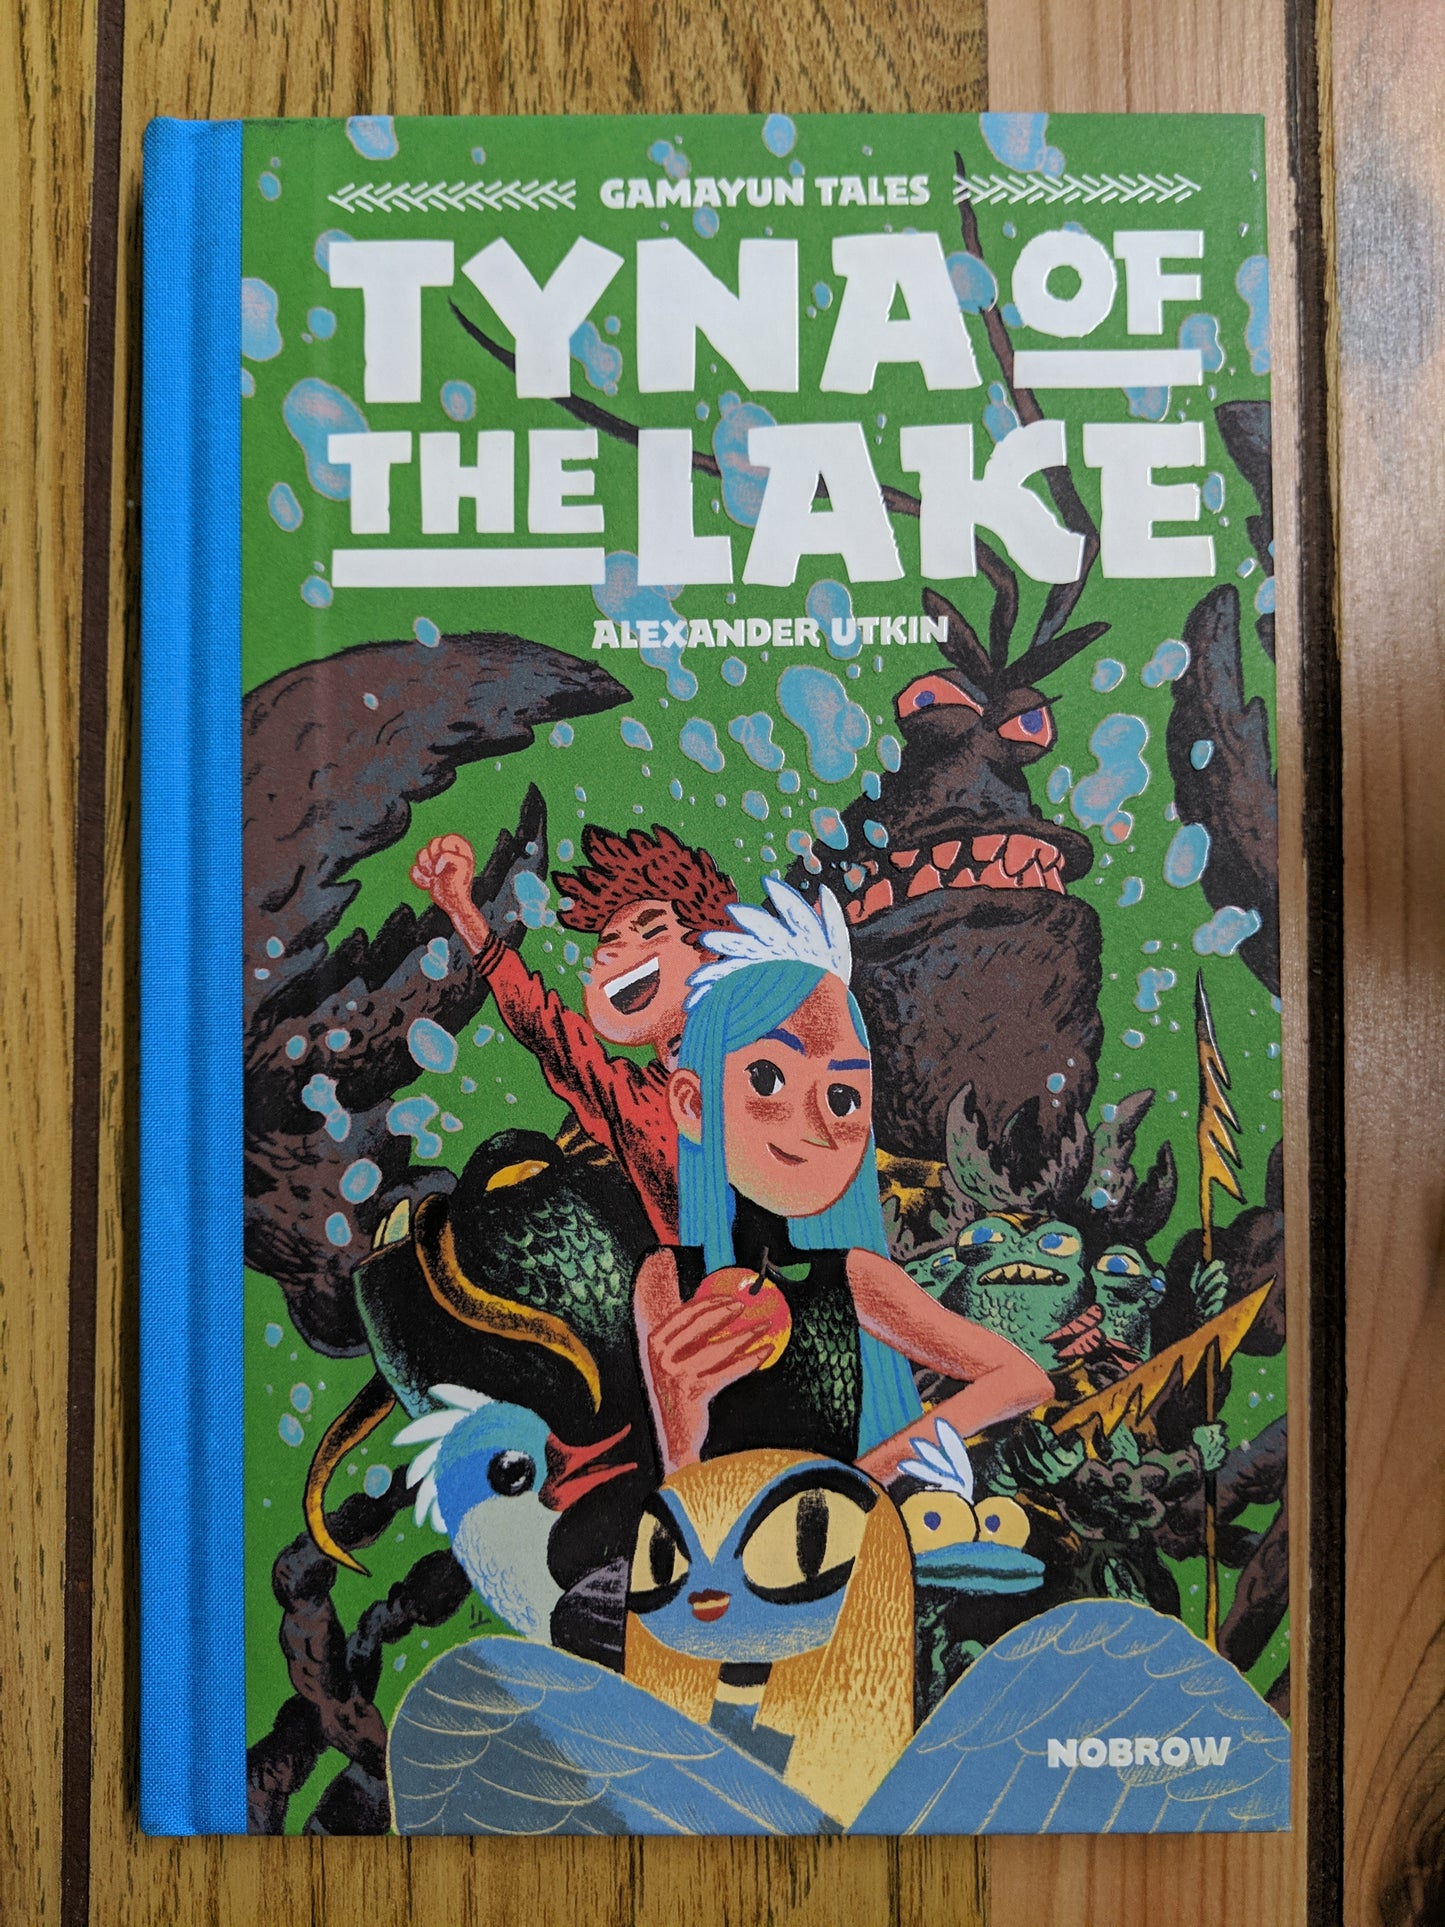 Tyna of the Lake: Gamayun Tales Vol 3